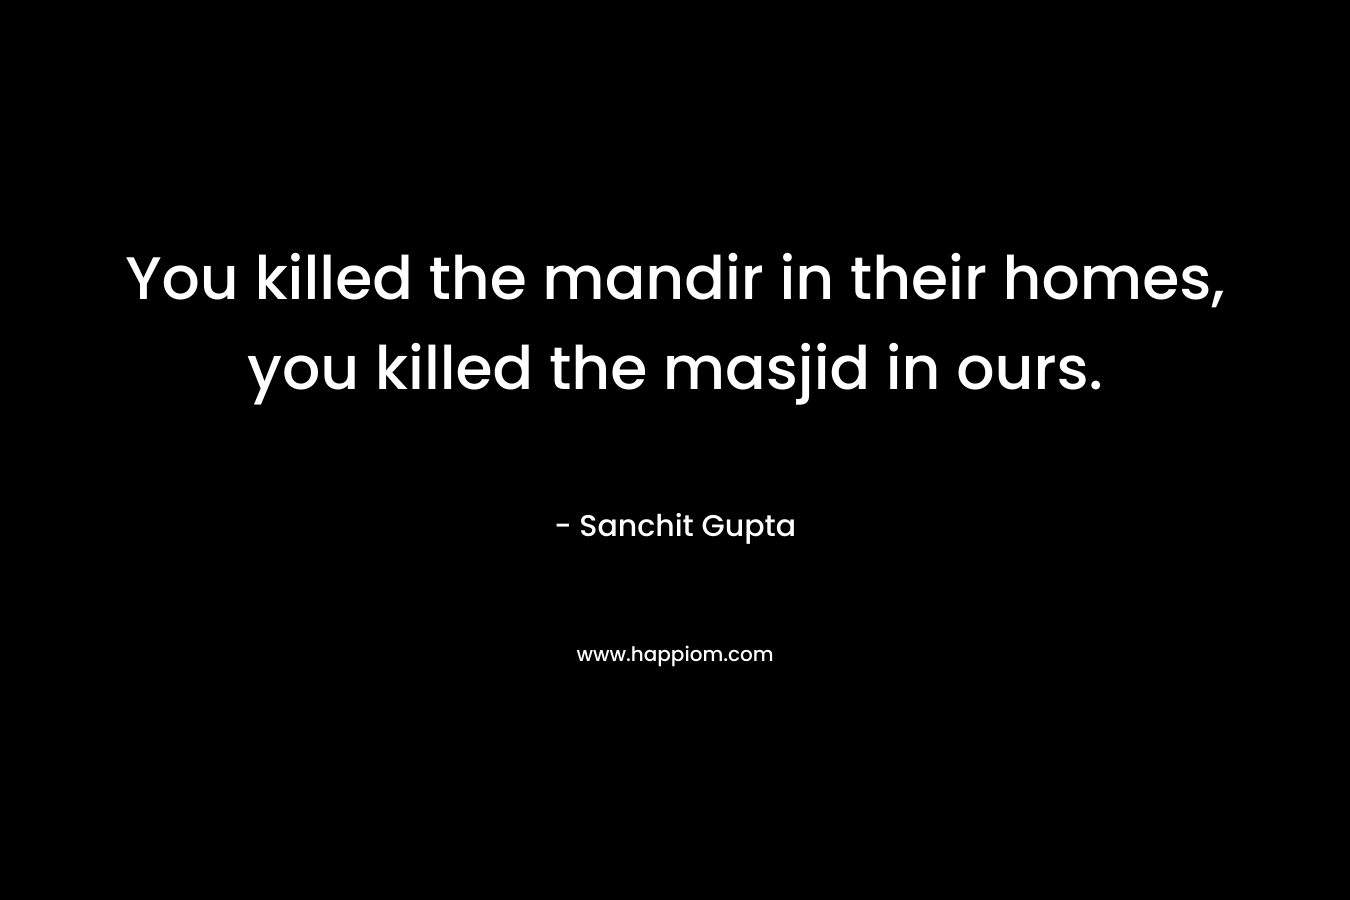 You killed the mandir in their homes, you killed the masjid in ours.